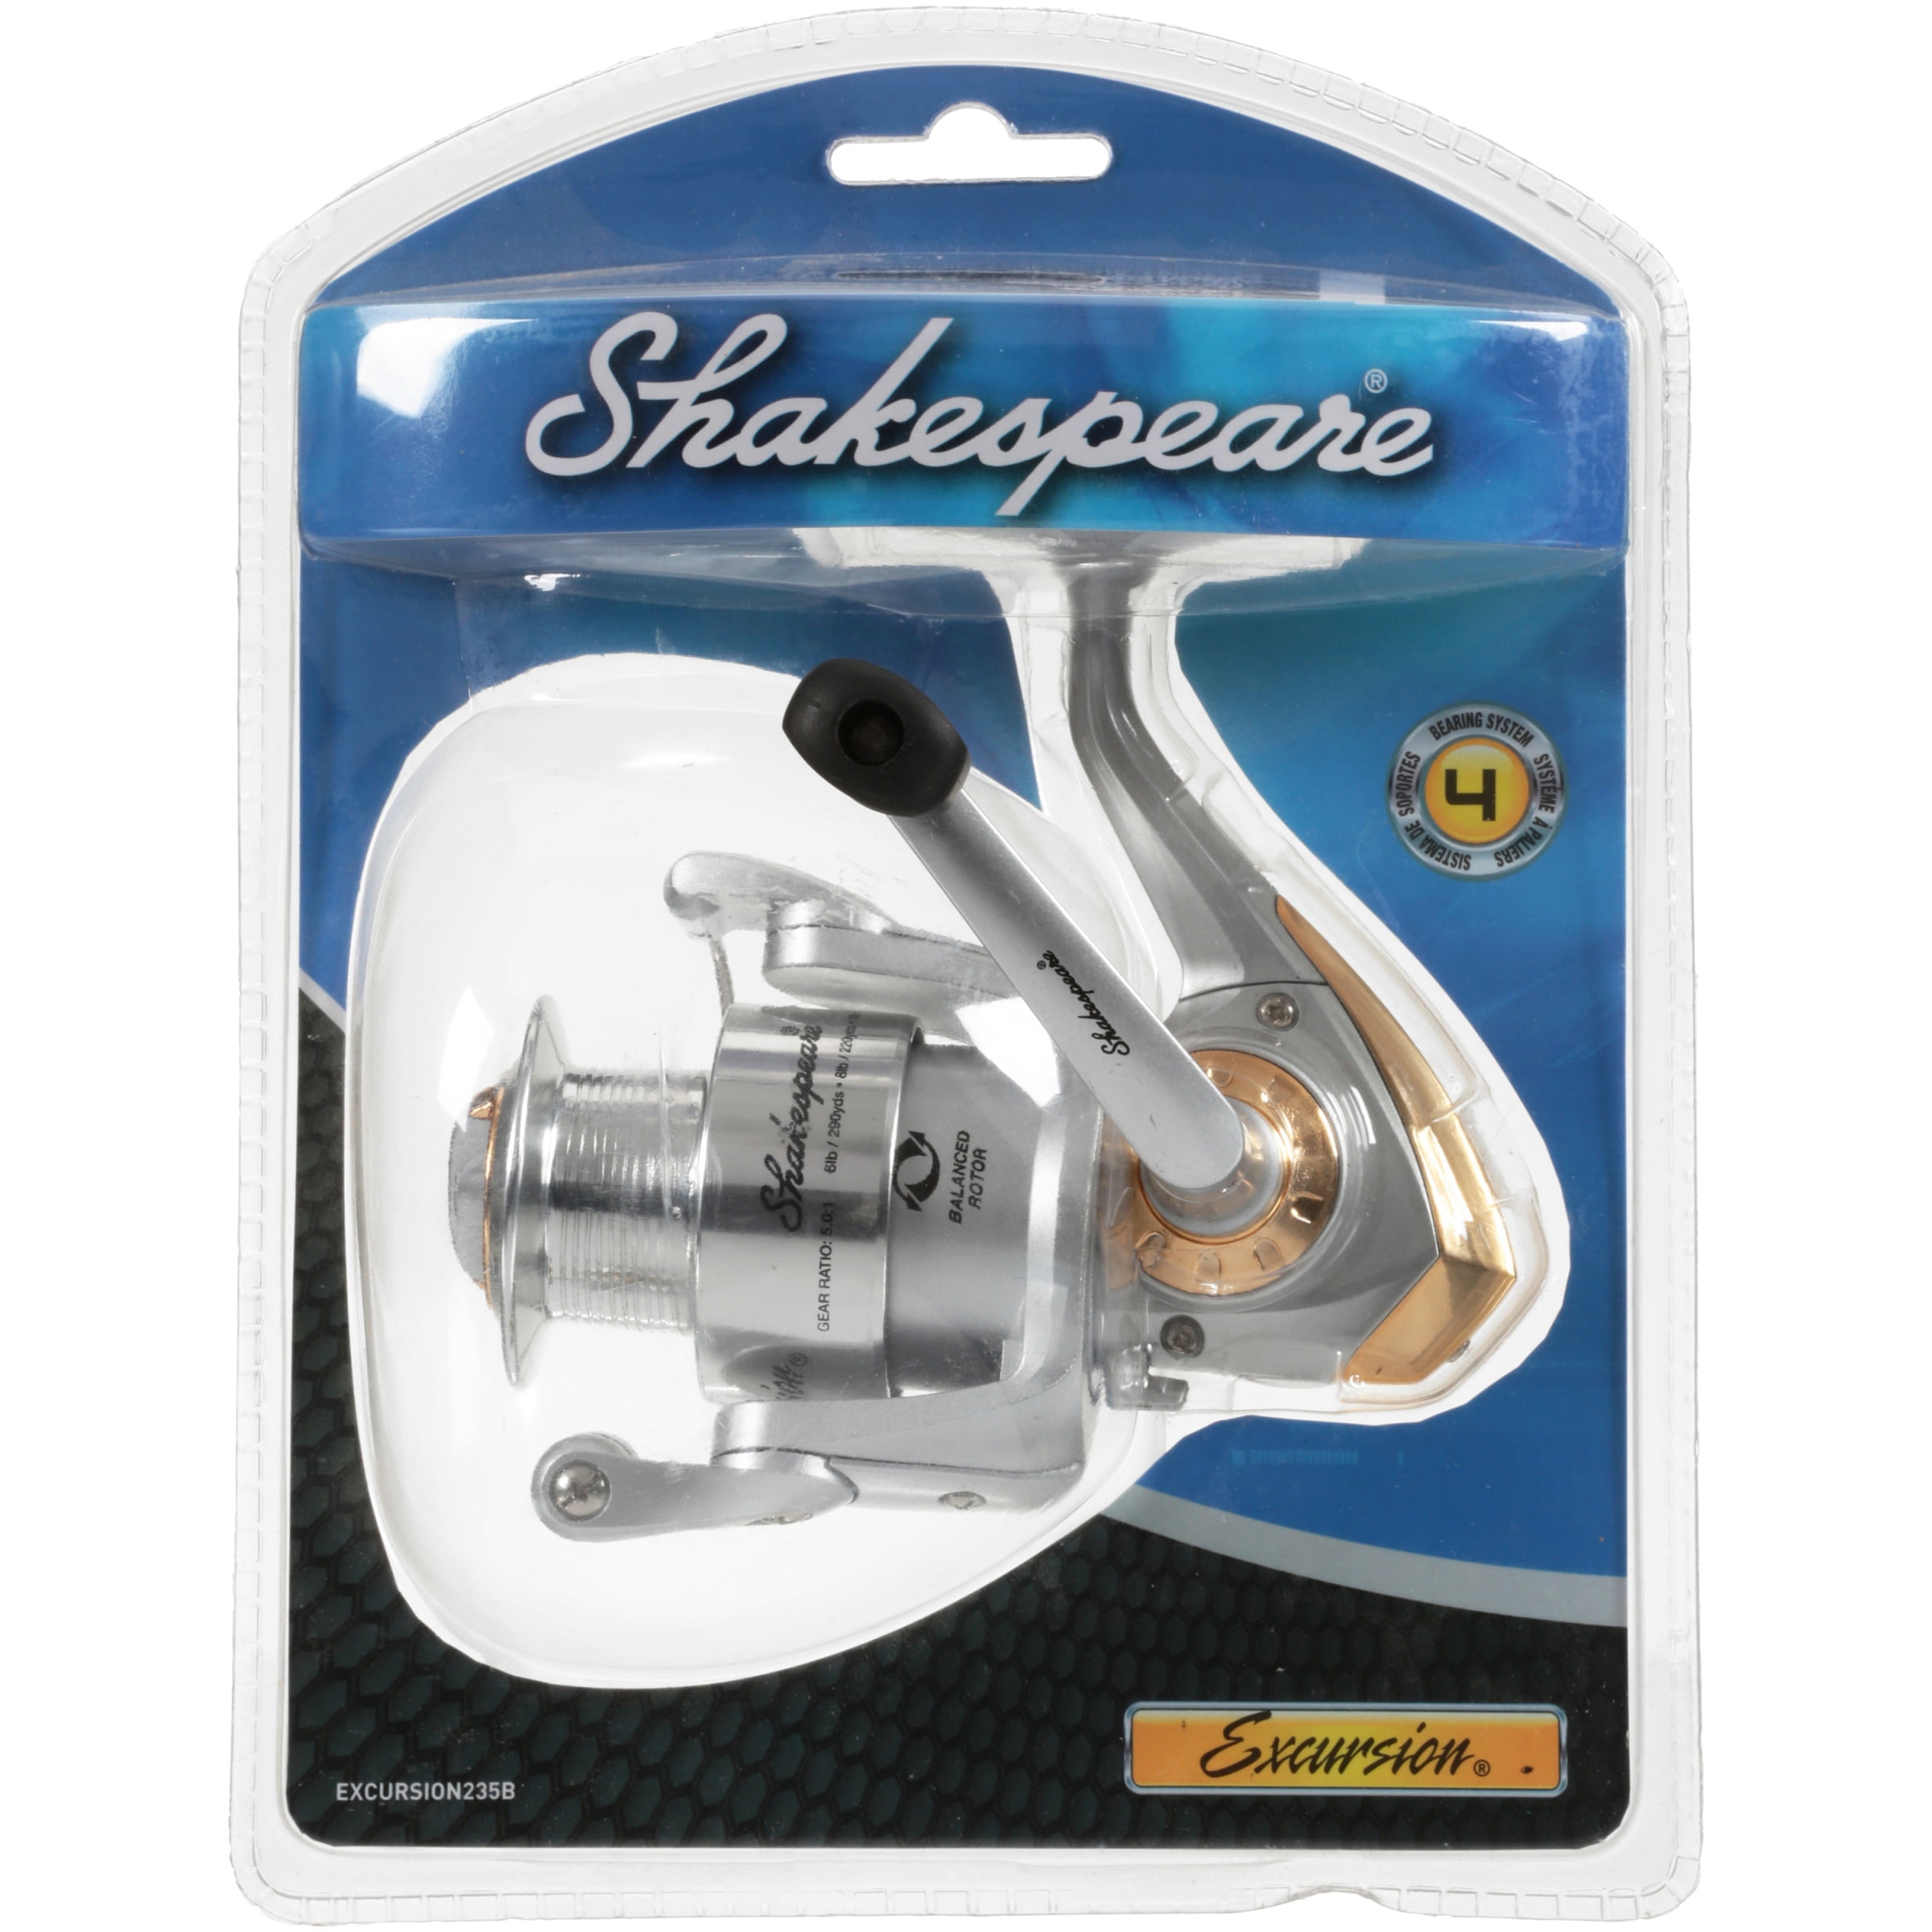 Shakespeare Excursion Fishing Spinning Reel 